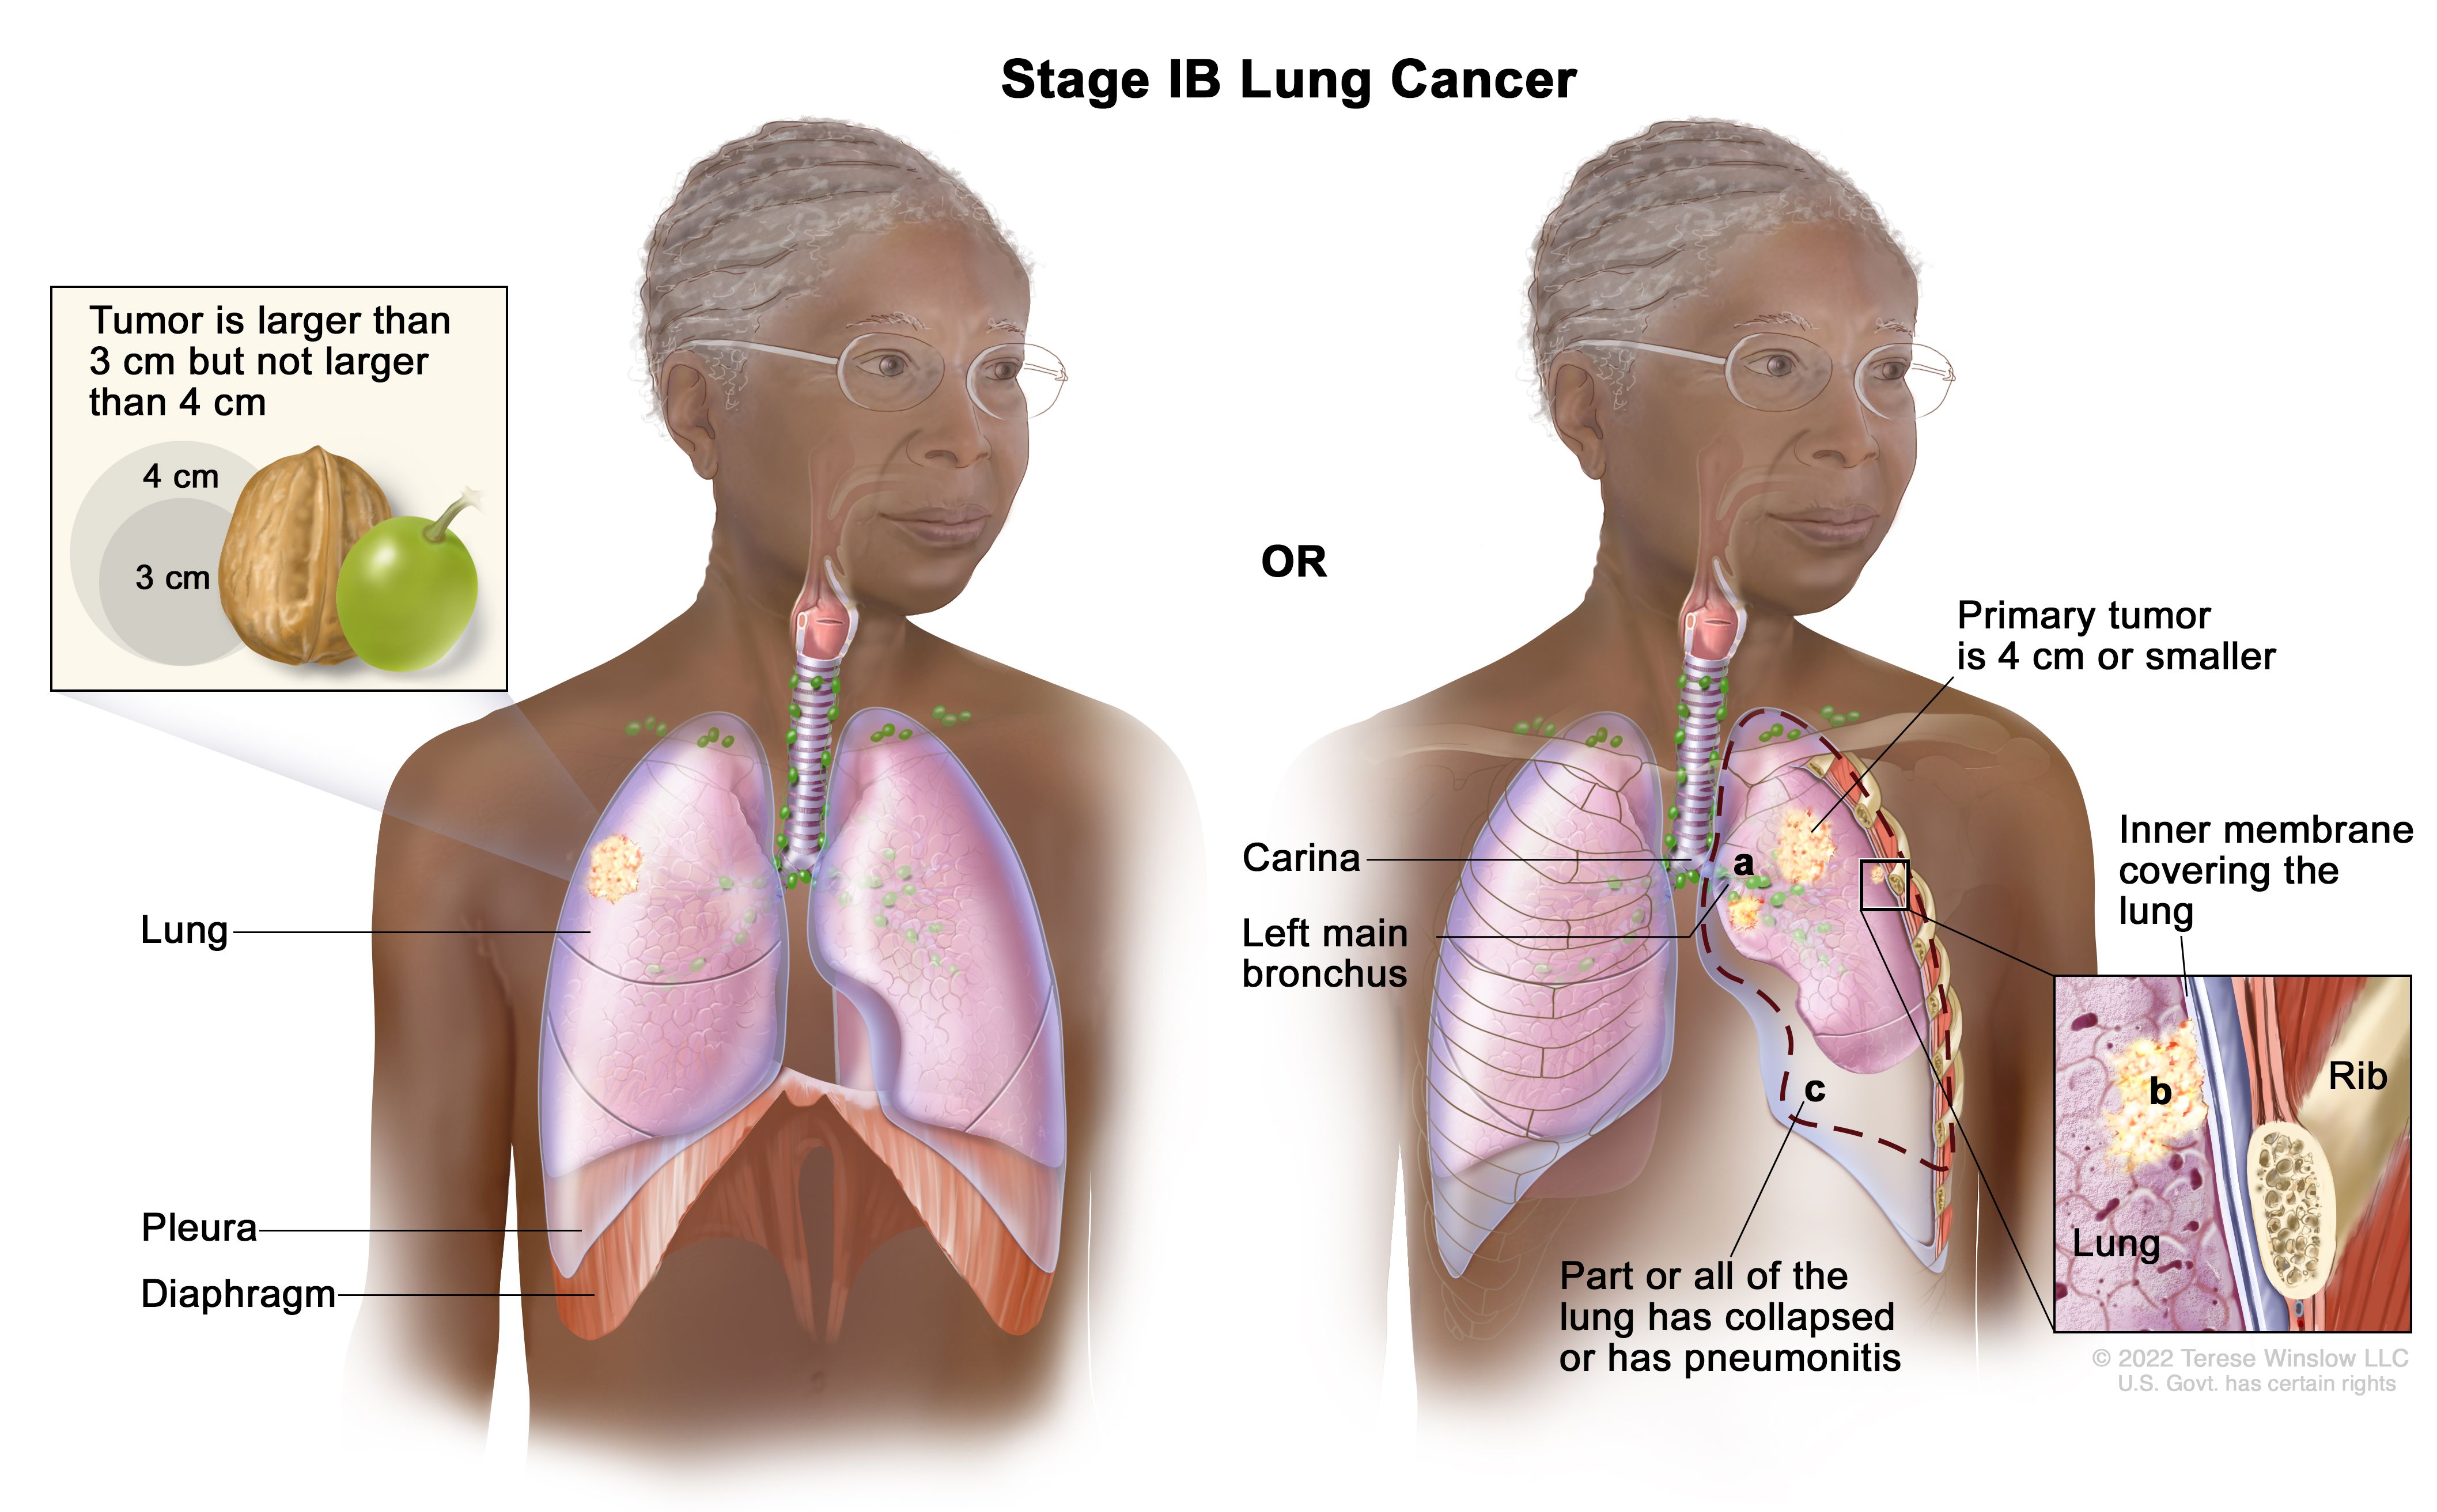 ORAL PATHOLOGY DURING SYSTEMIC THERAPIES IN LUNG CANCER